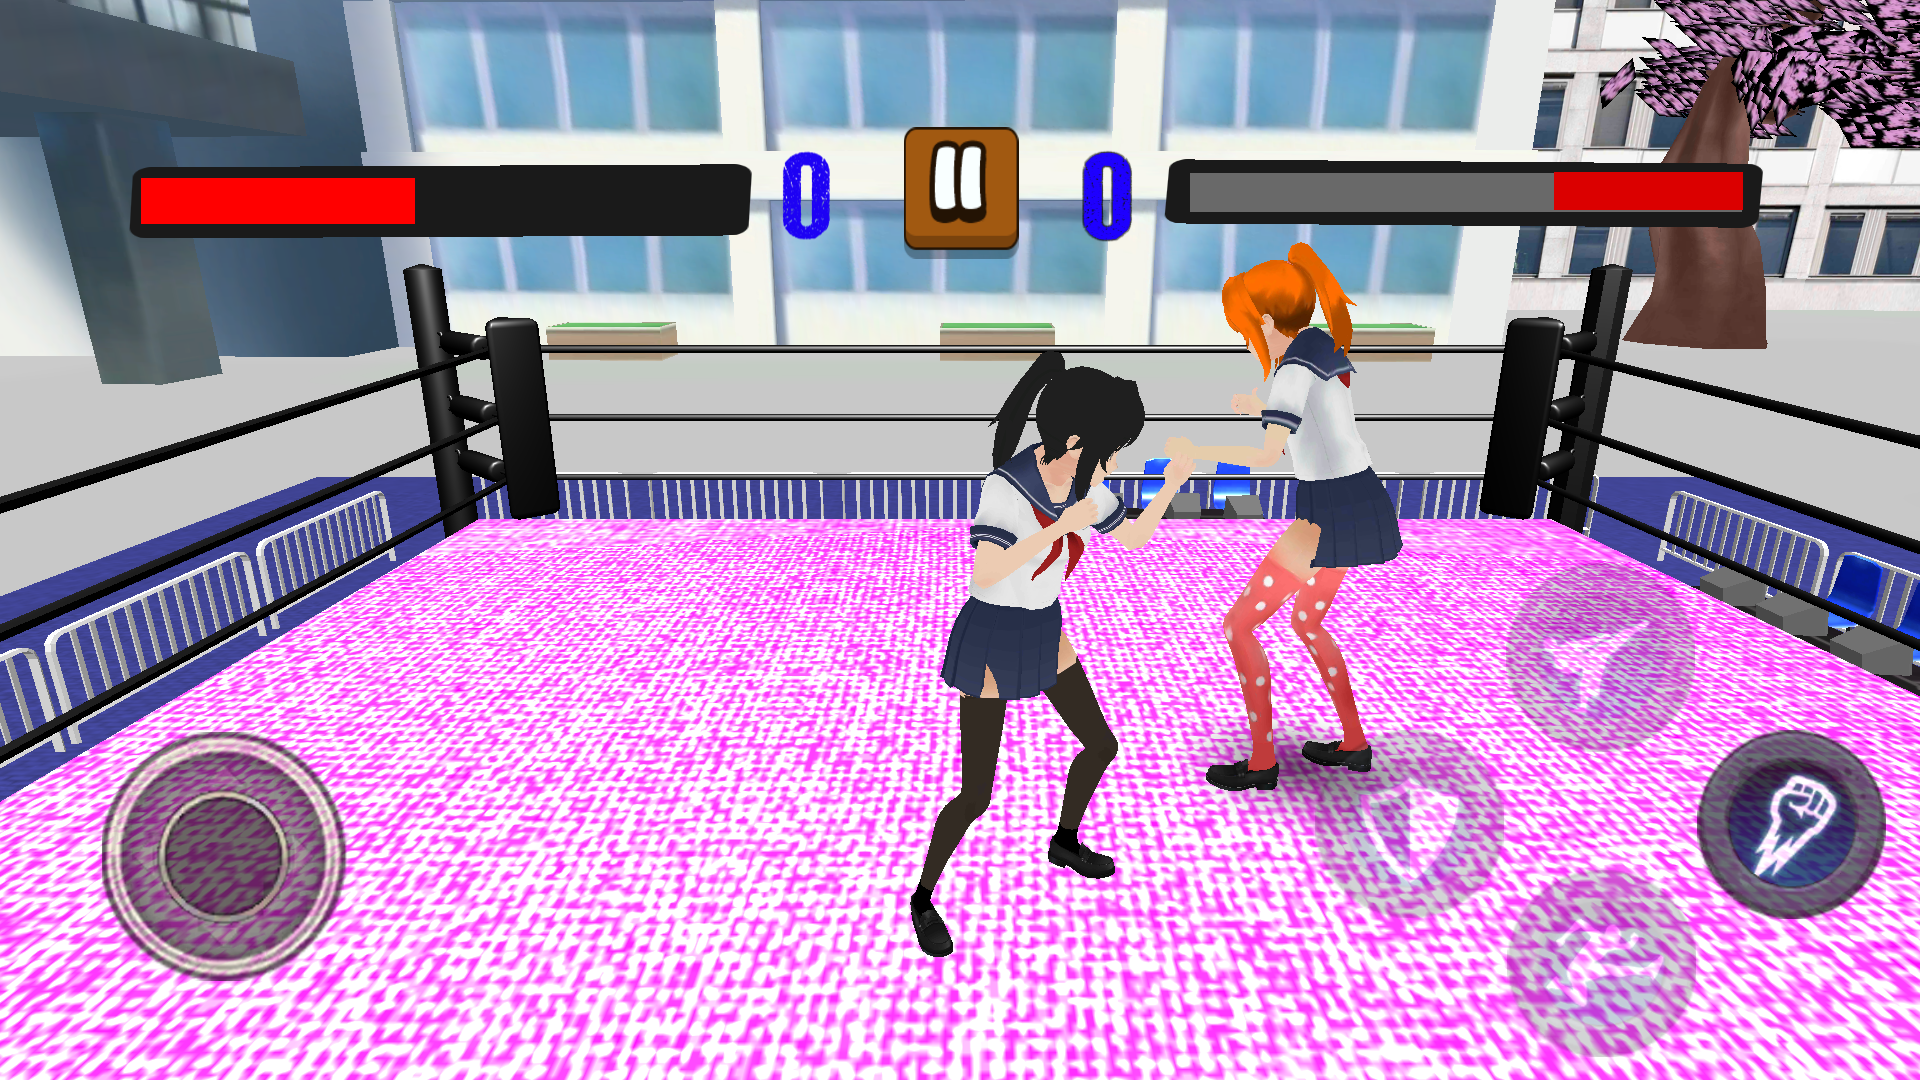 Yandere Fight unity project